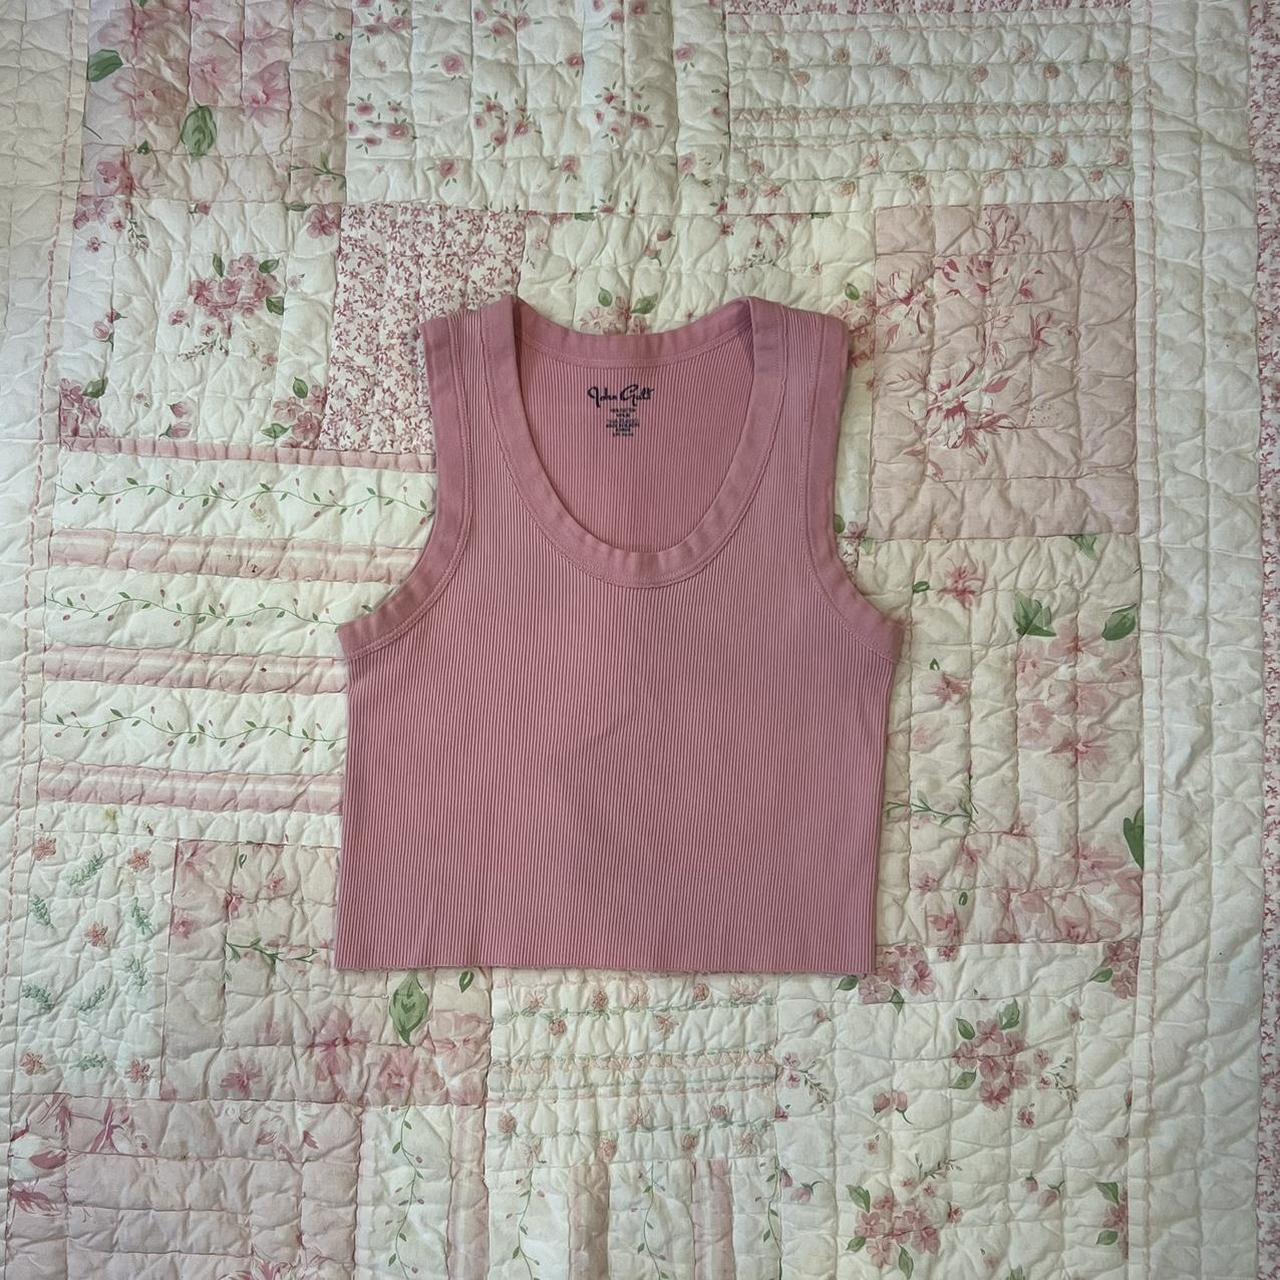 Brandy melville pink connor tank - Classic style - - Depop